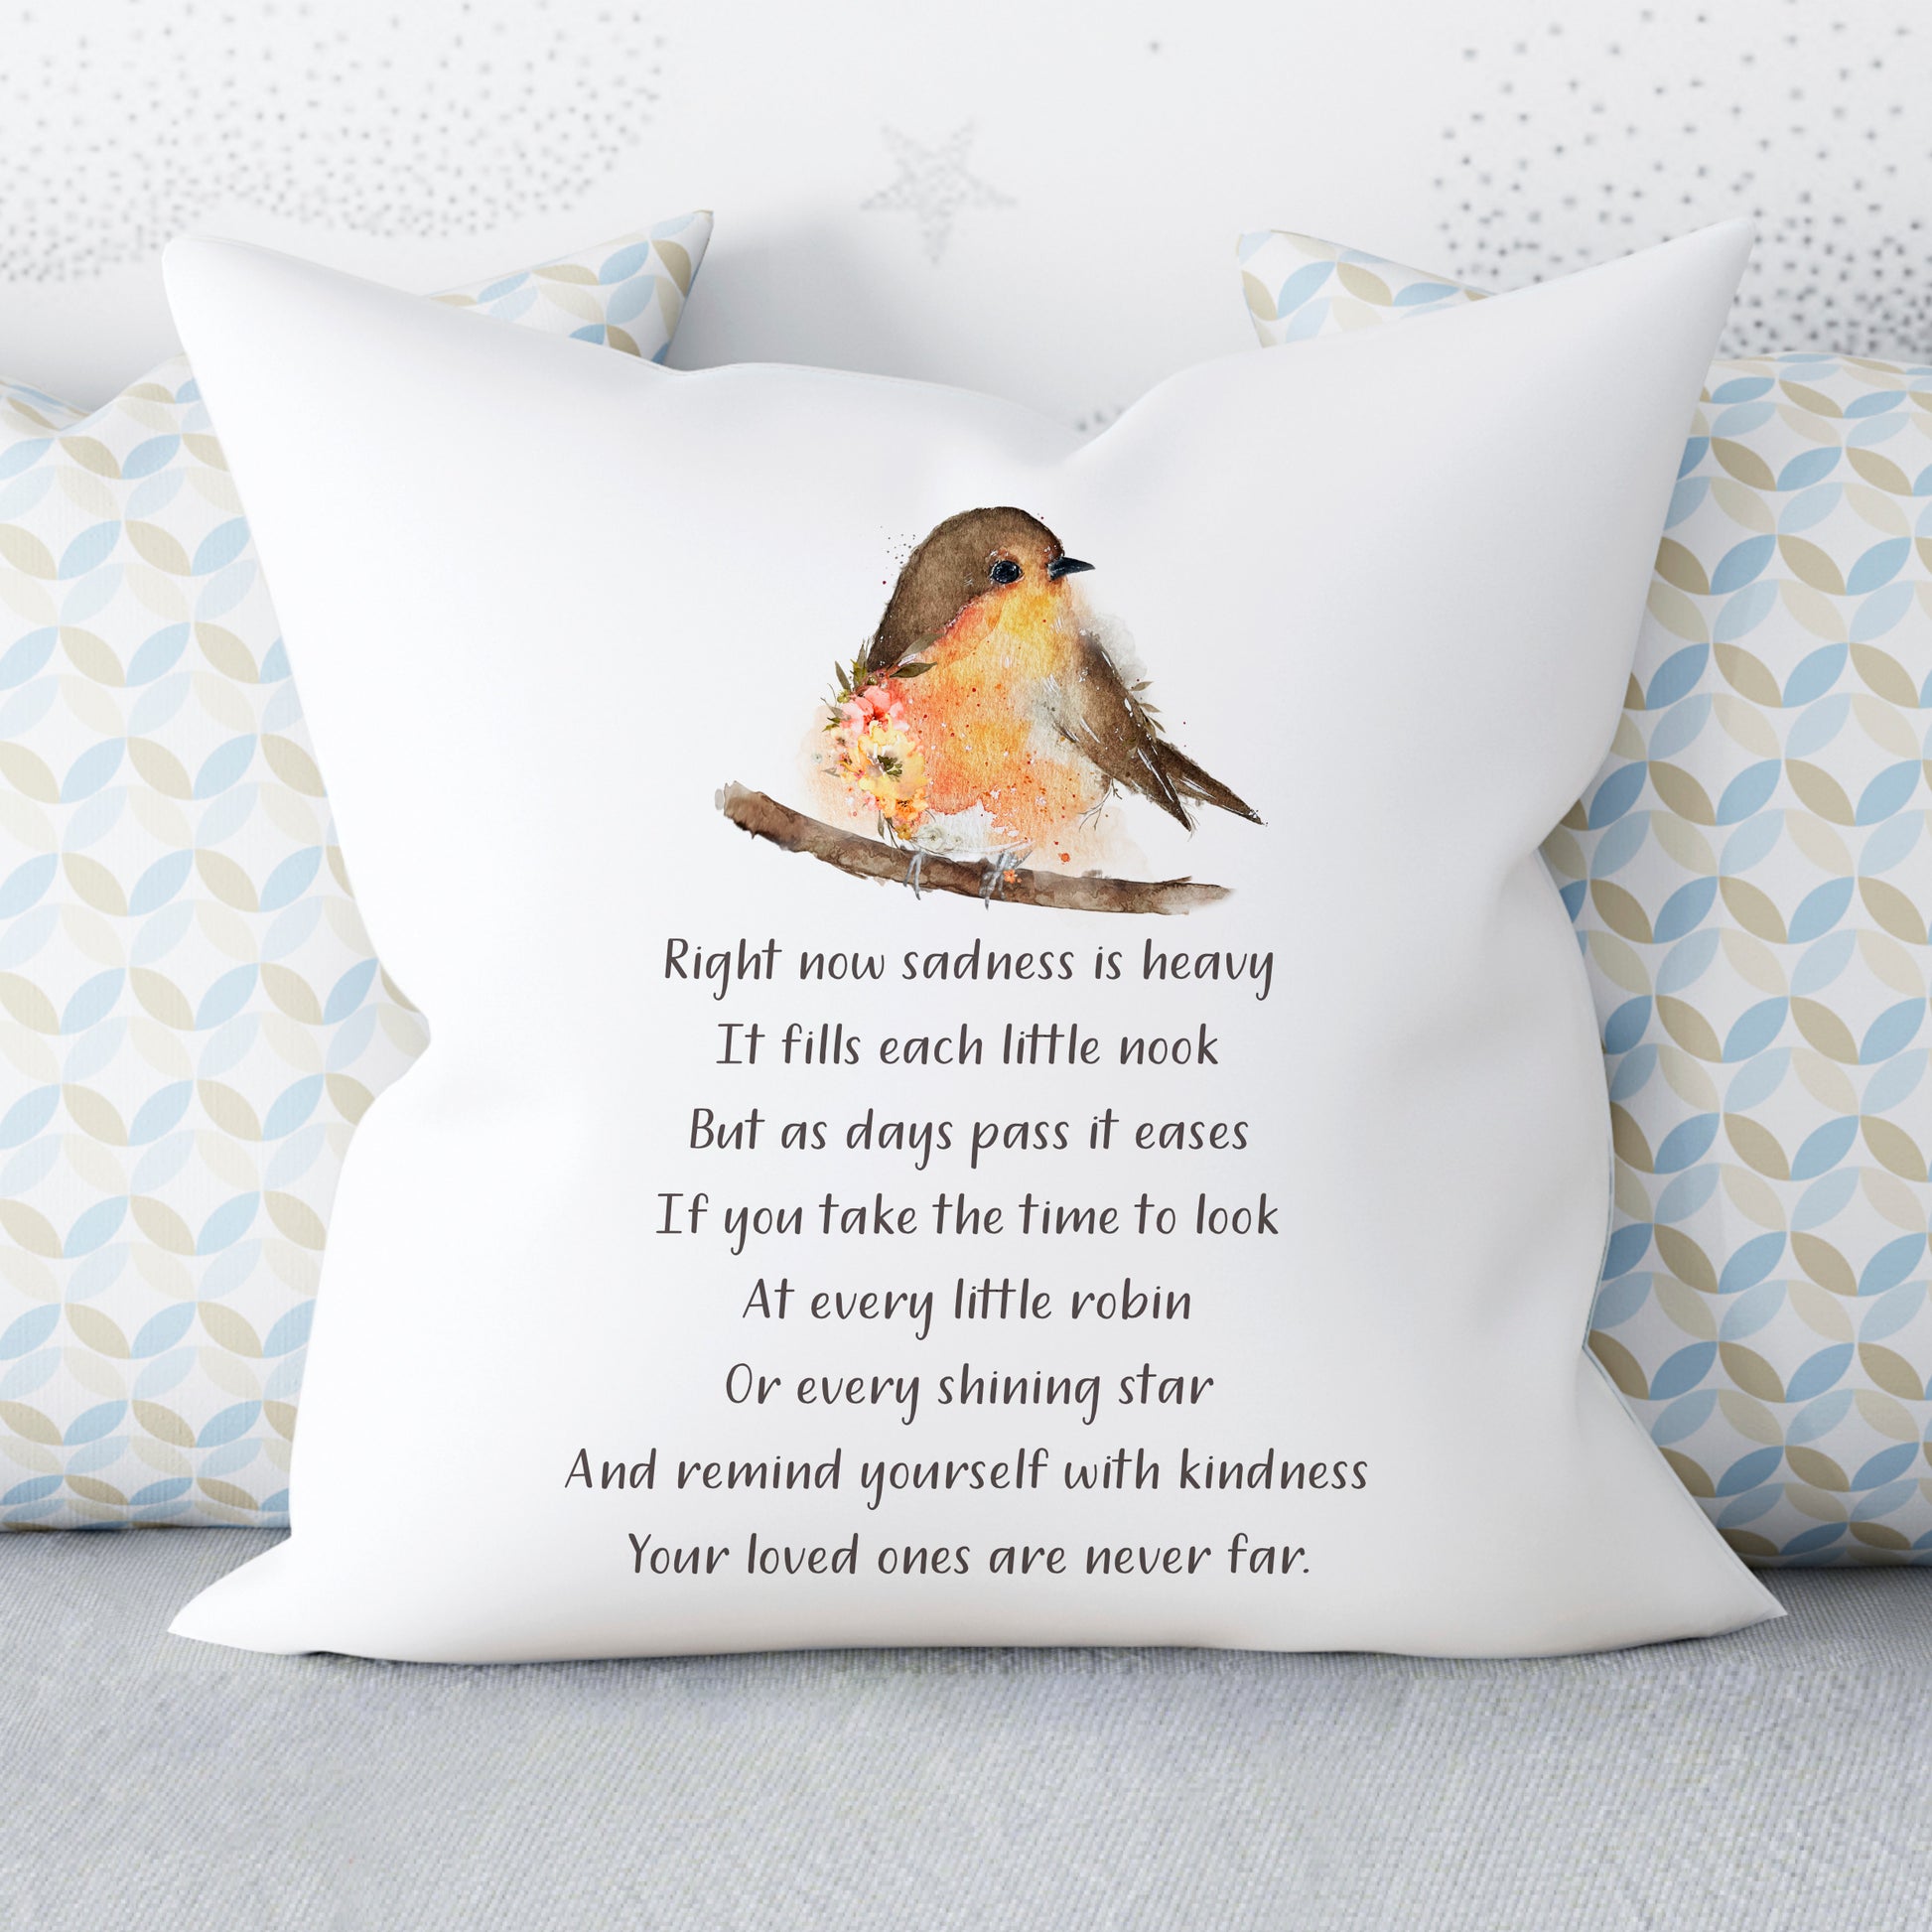 cushion with single robin sitting on a branch with a memorial poem printed underneath